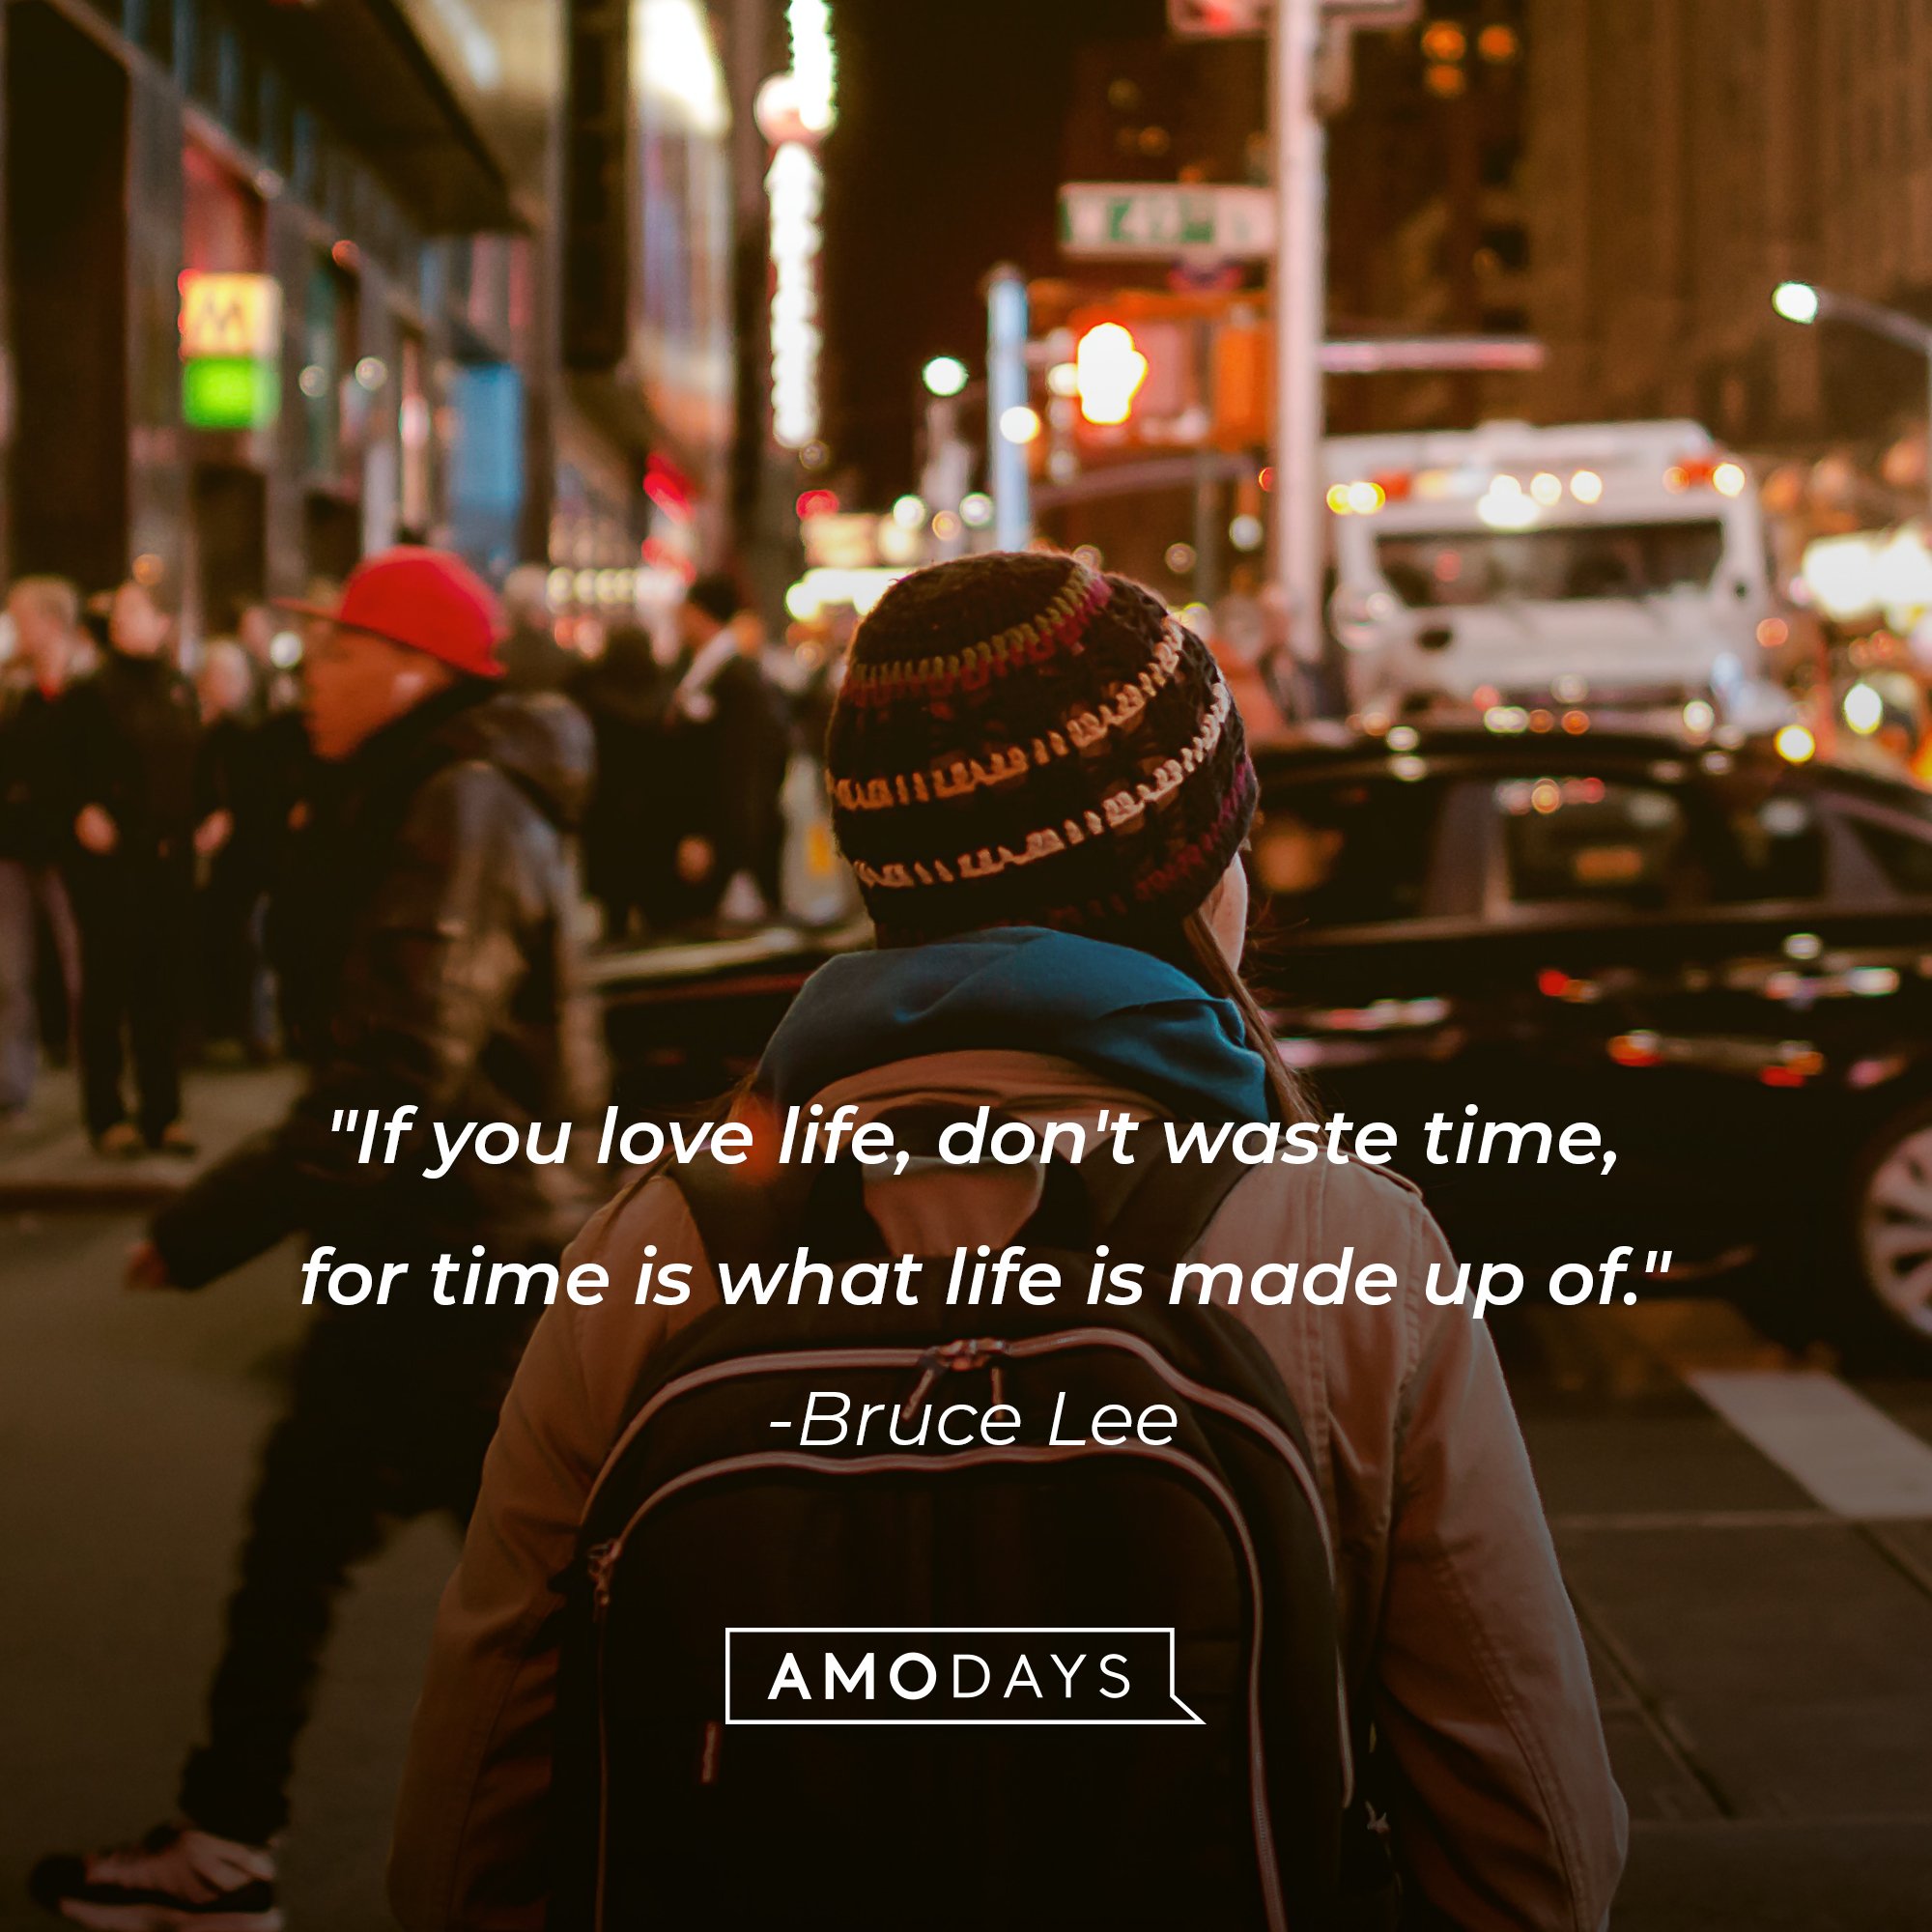 Bruce Lee’s quote: "If you love life, don't waste time, for time is what life is made up of." | Image: AmoDays 